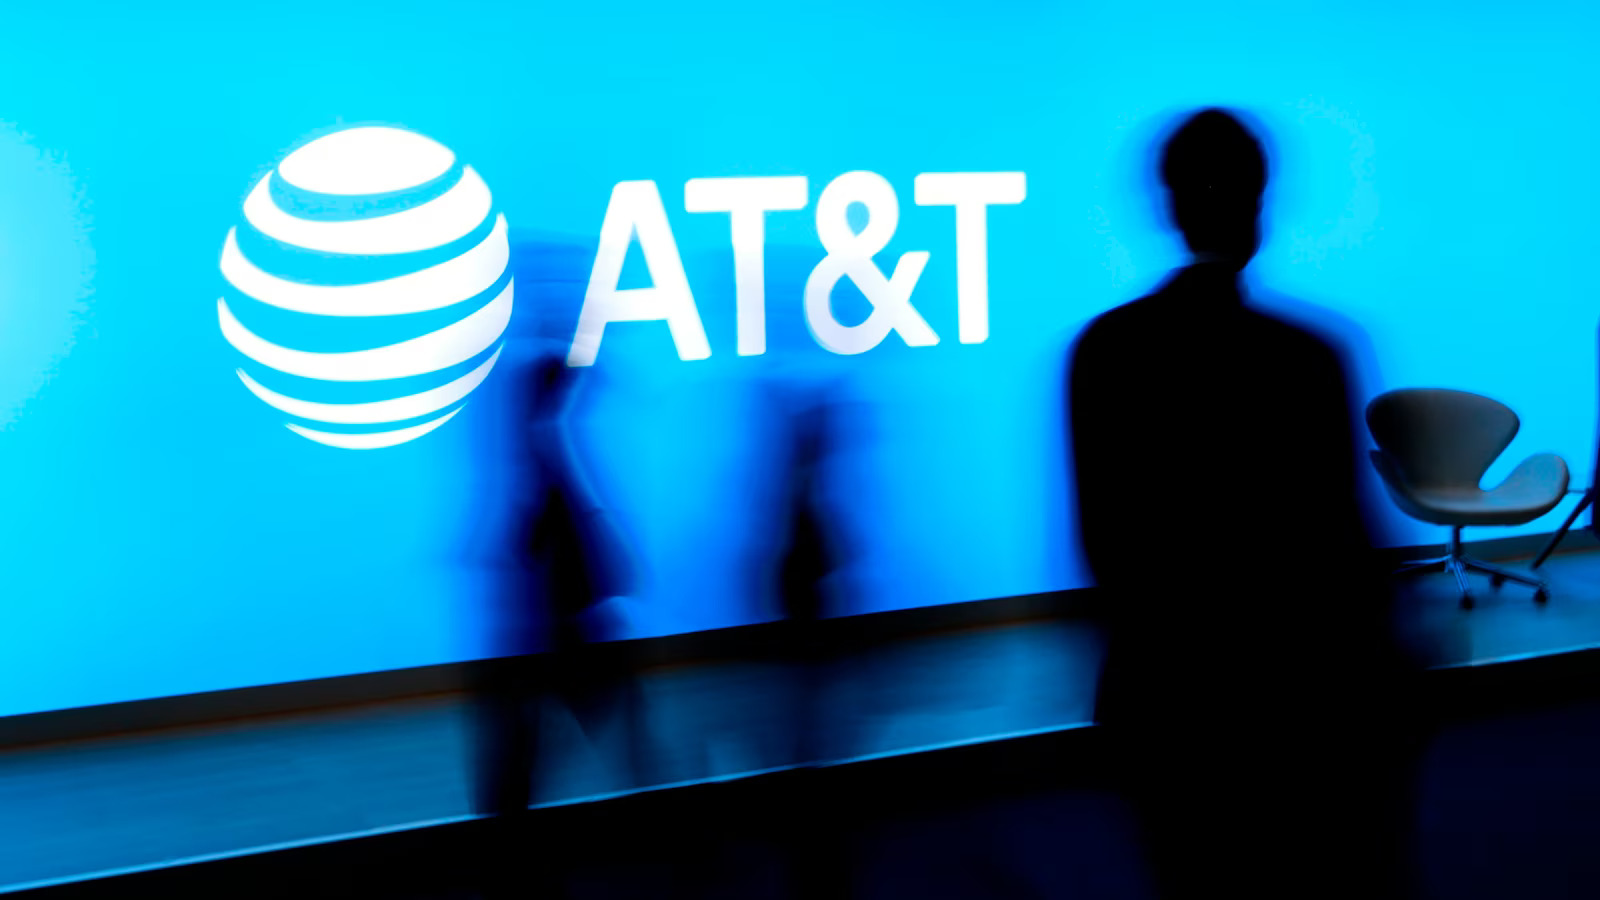 AT&T Launches Investigation into Leak Exposing Millions of Customers' Data on Dark Web